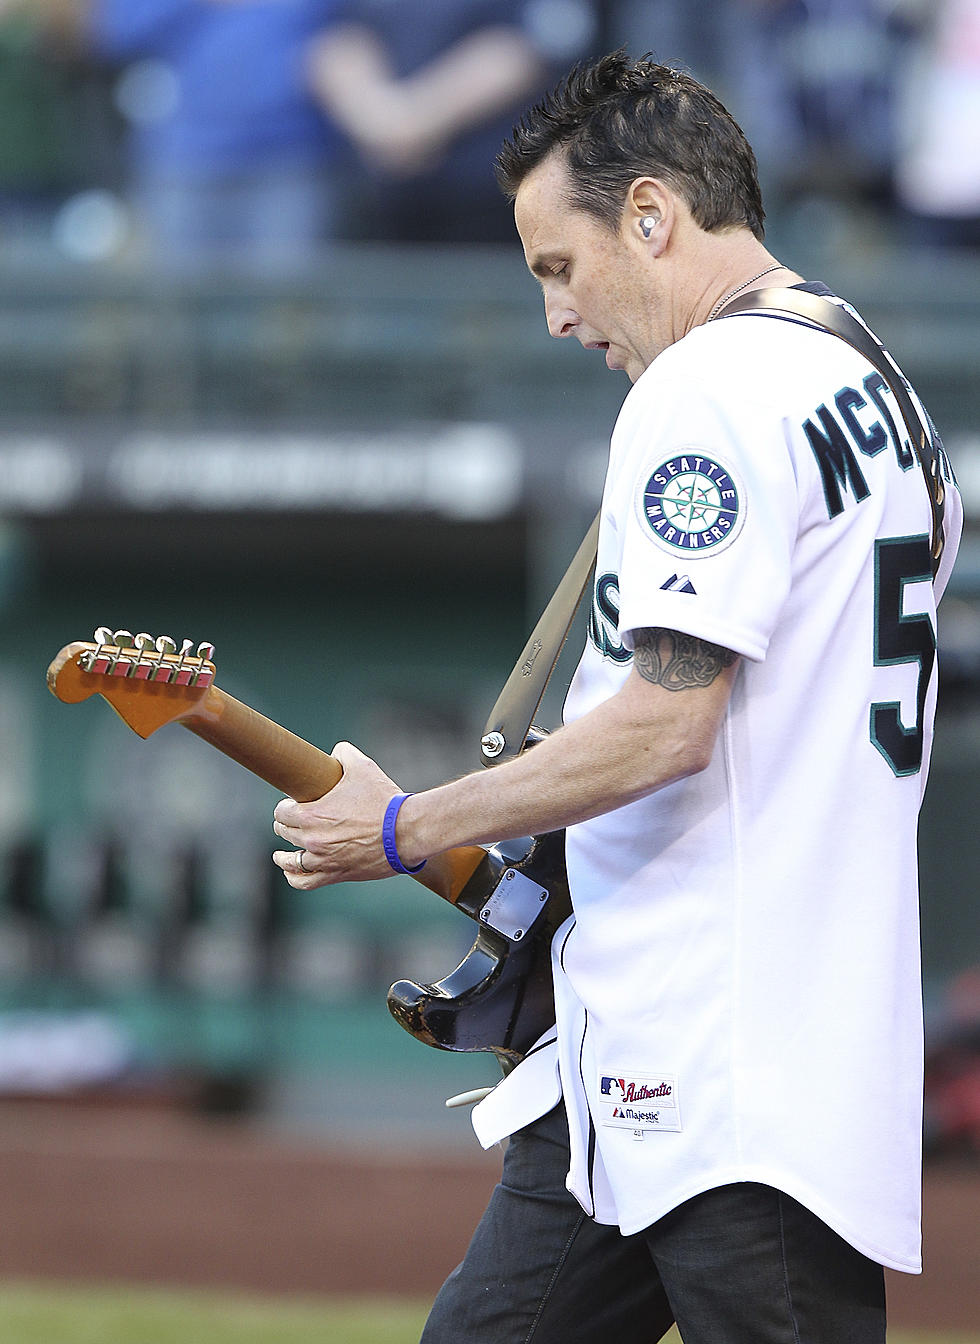 Pearl Jam’s Mike McCready to Play National Anthem Before Mariners Game